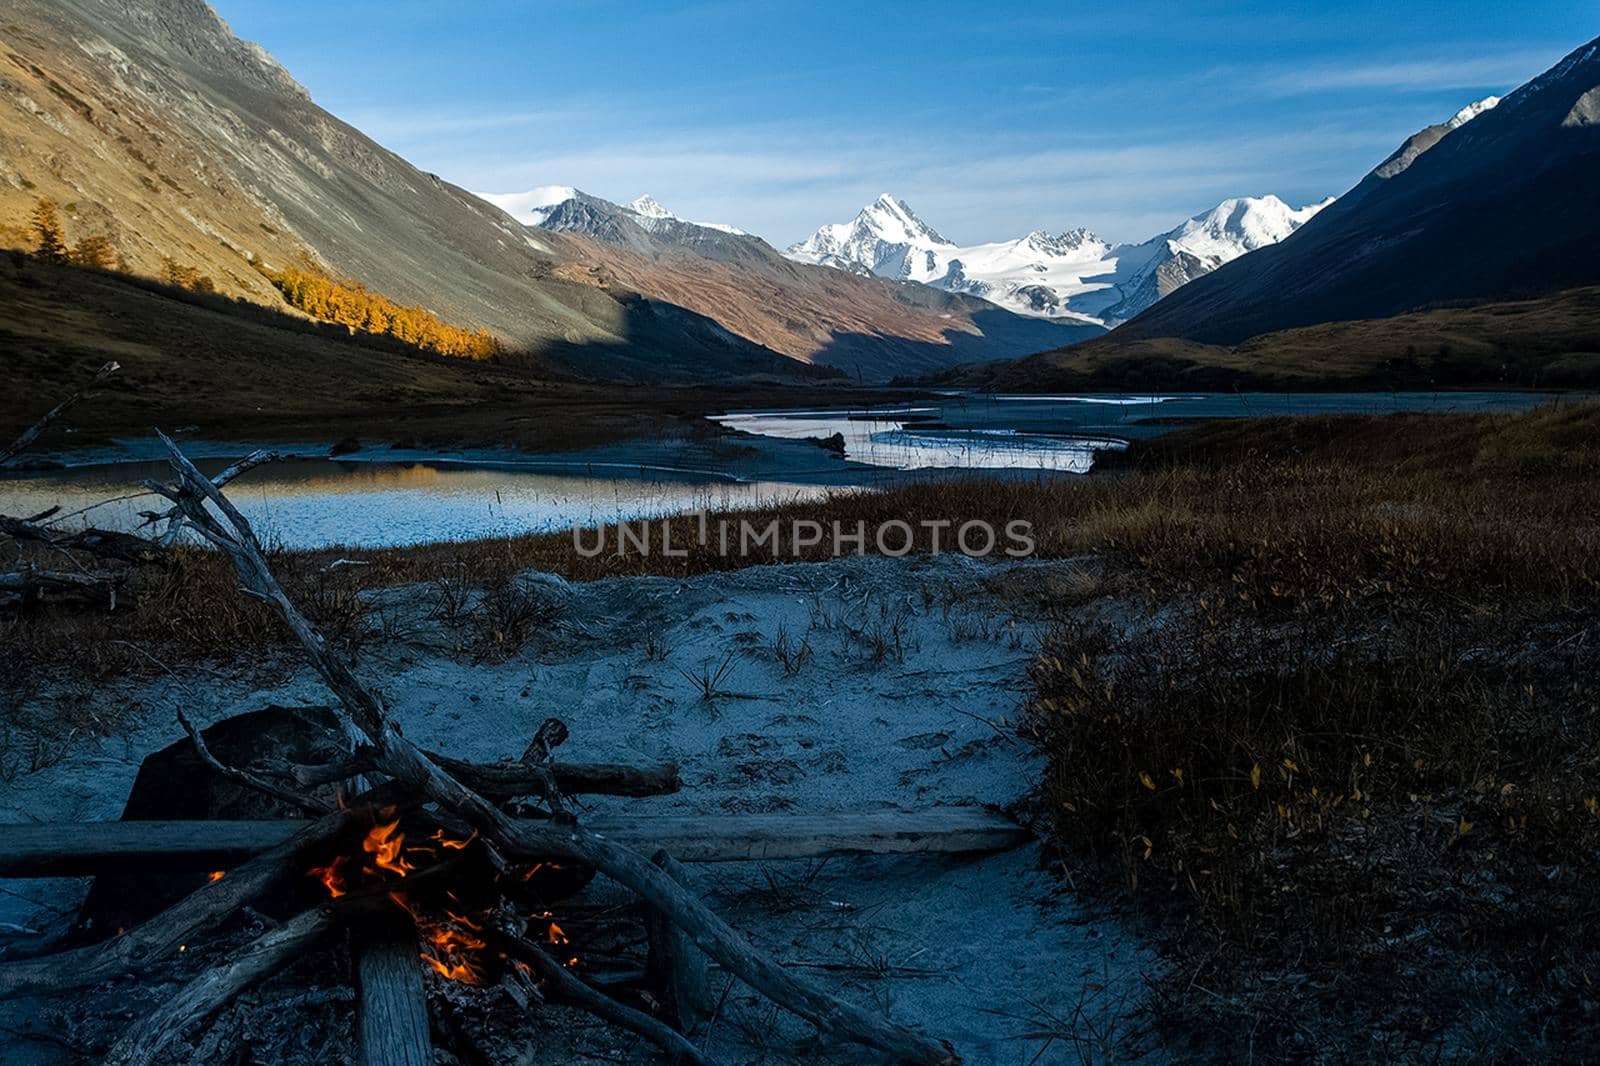 bonfire on the banks of the Altai Mountain River. by DePo